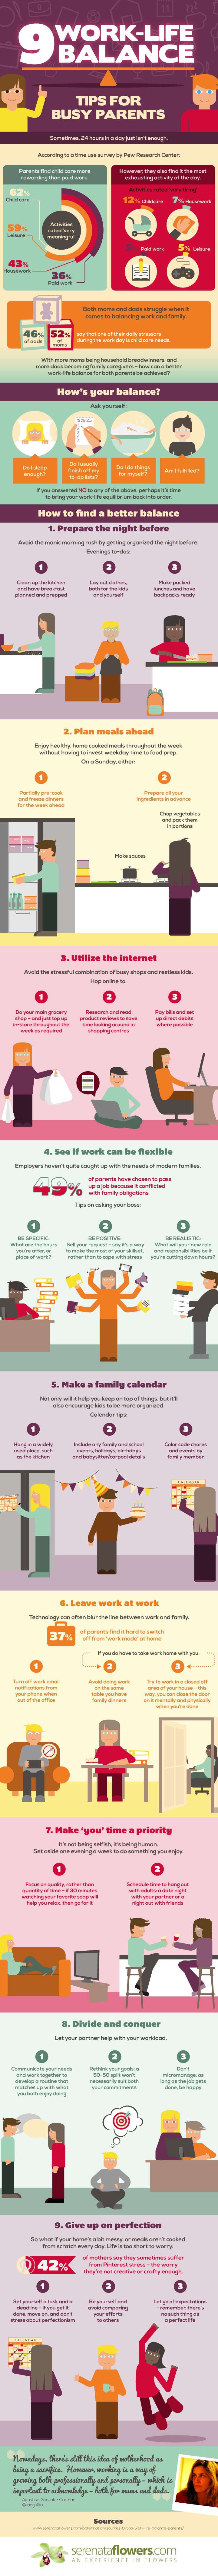 9 Work-Life Balance Tips for Busy Working Parents 